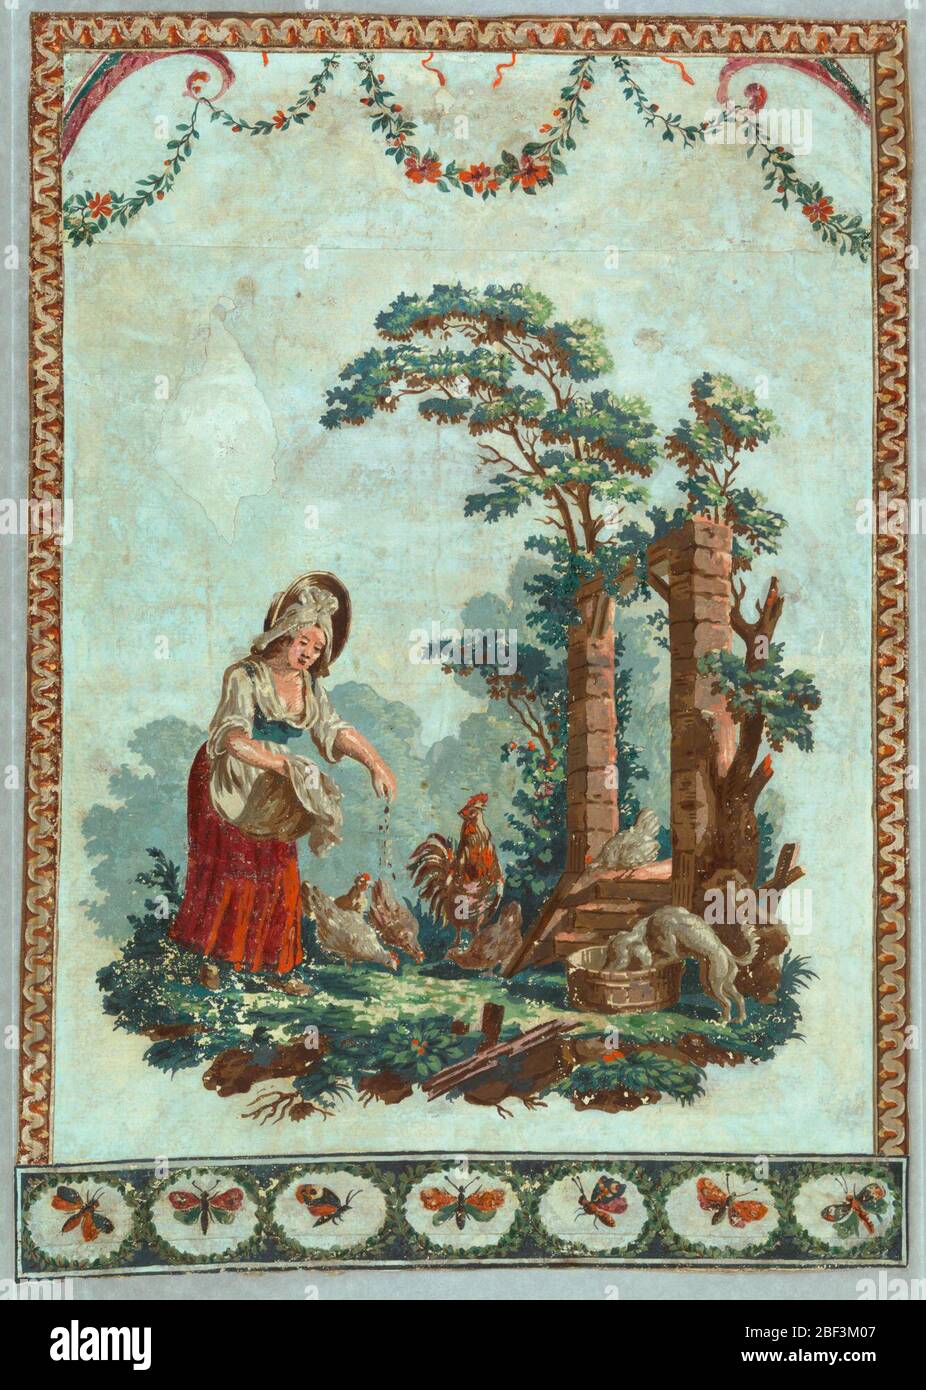 Sidewall and borders. Vertical rectangle. Woman in a red-skirted dress, feeding chickens. Across the bottom is a border of butterflies; across the top a border of festooned flowers and foliage; above this, and along the two sides, a border of simulated cyma reversa molding. Stock Photo